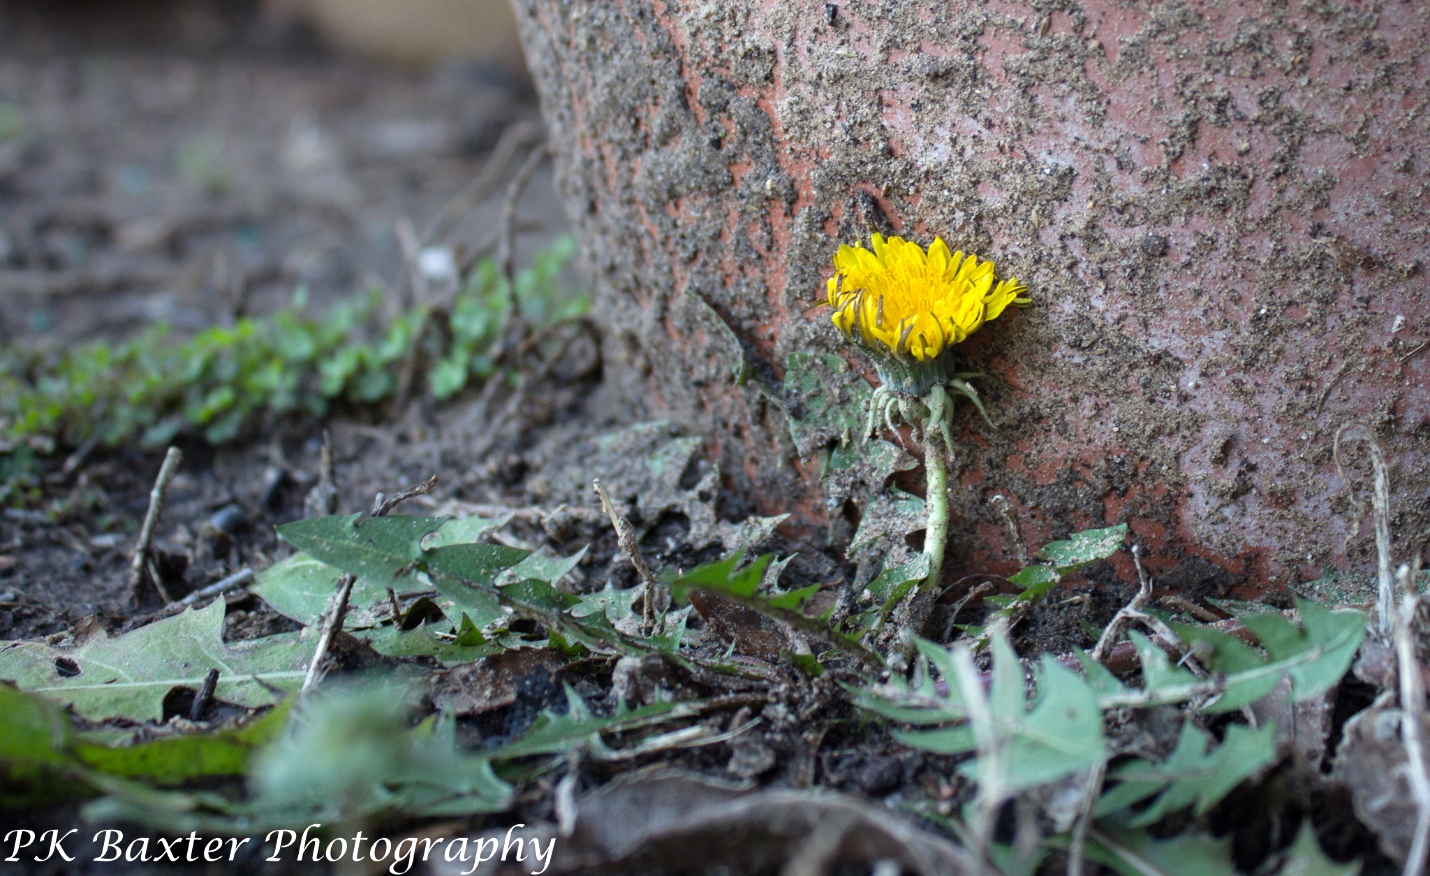 A yellow flower growing out of a tree trunk

Description automatically generated with low confidence